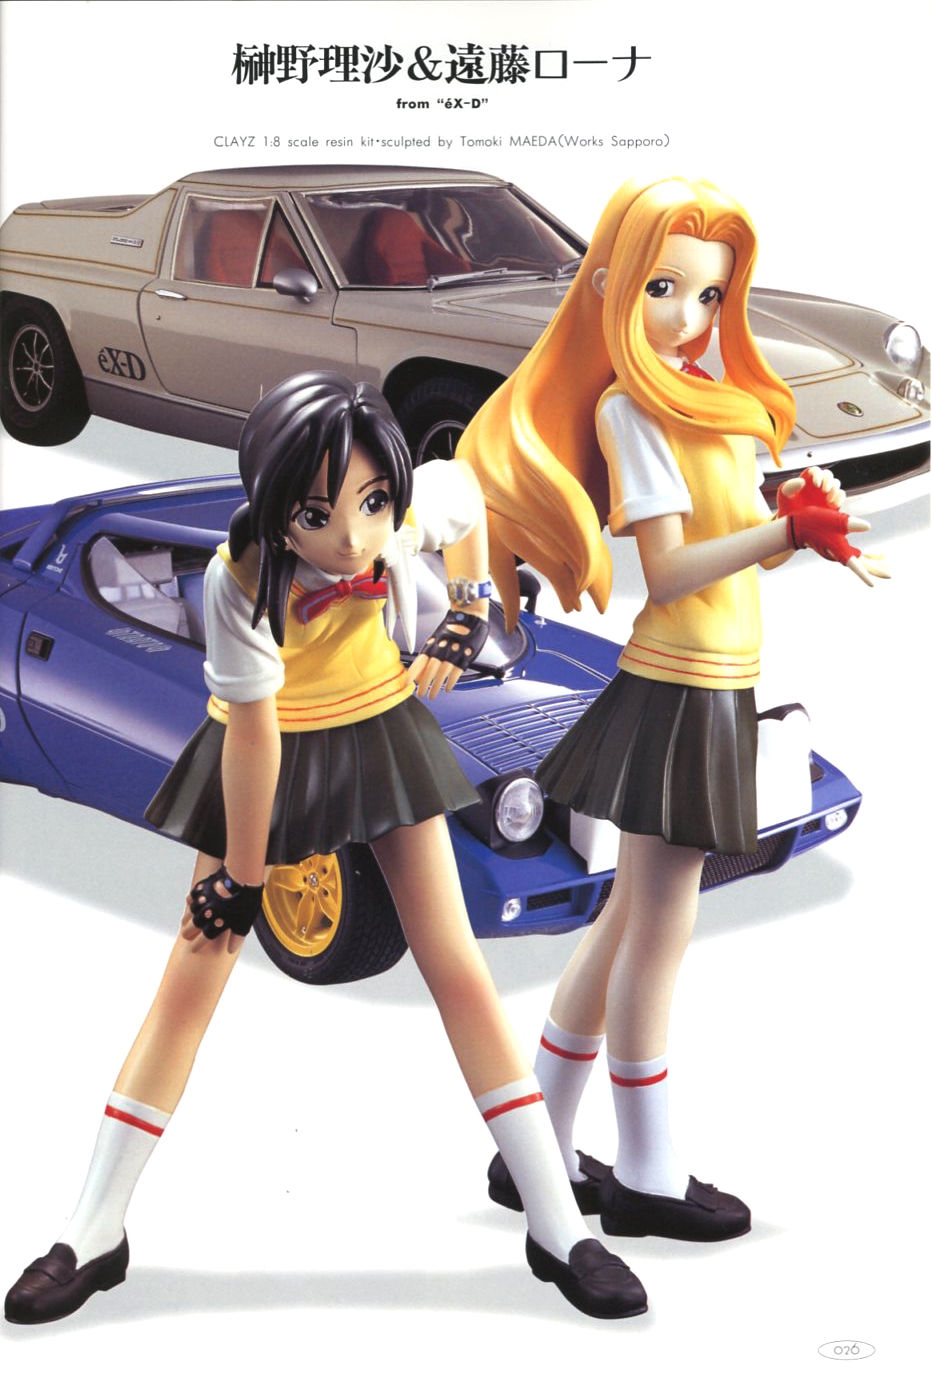 Hobby Japan Mook All That Figure 2001 20